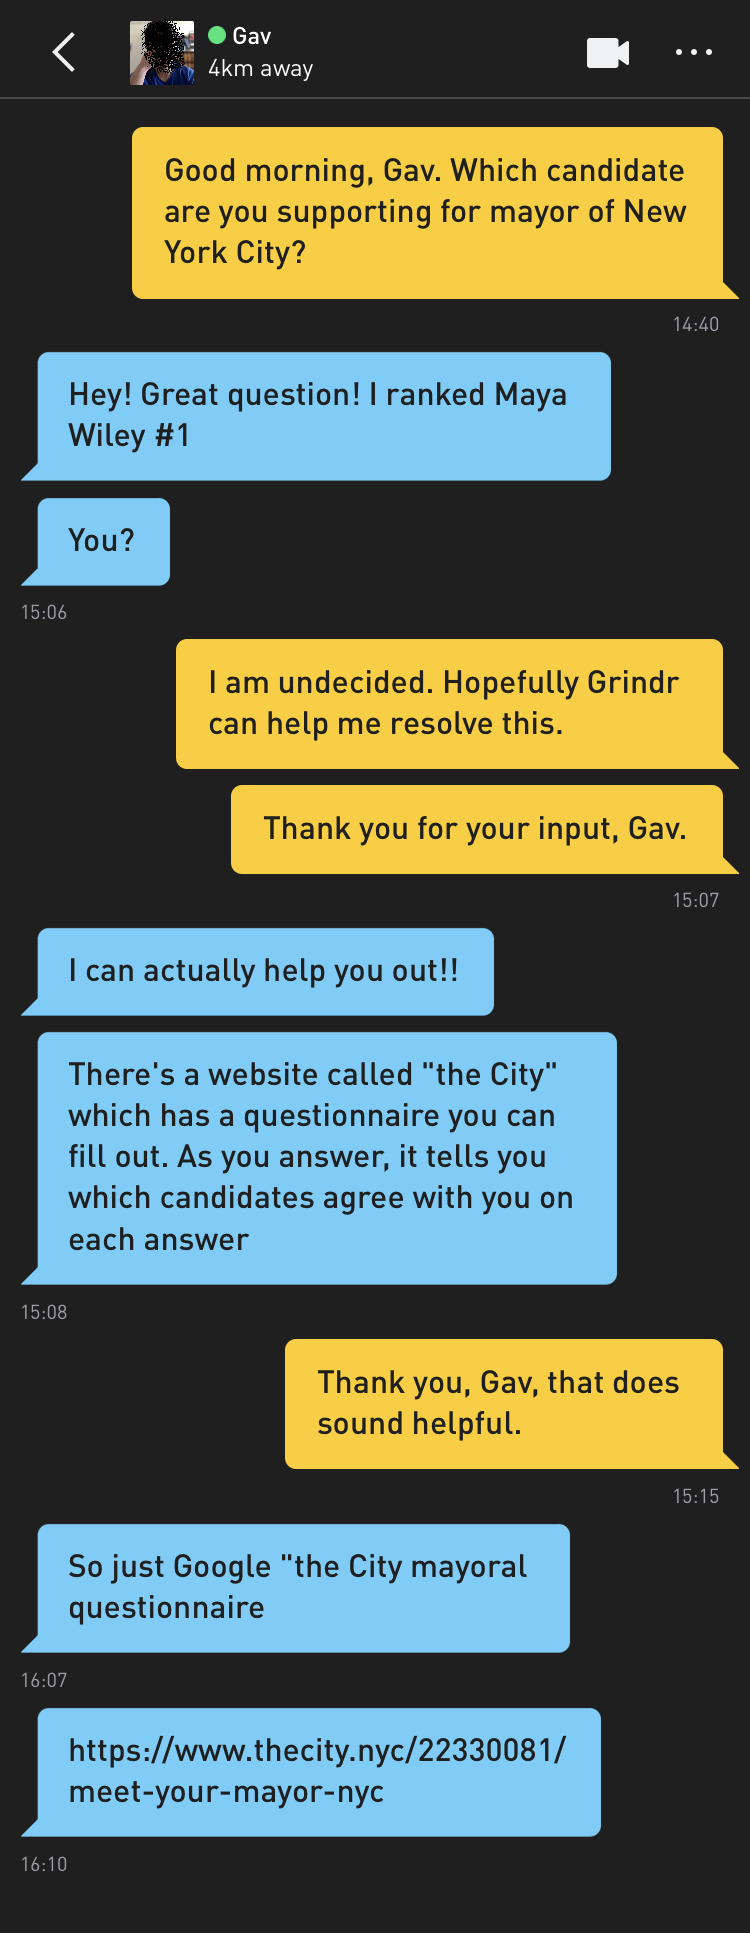 Me: Good morning, Gav. Which candidate are you supporting for mayor of New York City? Gav: Hey! Great question! I ranked Maya Wiley #1 Gav: You? Me: I am undecided. Hopefully Grindr can help me resolve this. Me: Thank you for your input, Gav. Gav: I can actually help you out!! Gav: There's a website called "the City" which has a questionnaire you can fill out. As you answer, it tells you which candidates agree with you on each answer Me: Thank you, Gav, that does sound helpful. Gav: So just Google "the City mayoral questionnaire Gav: https://www.thecity.nyc/22330081/meet-your-mayor-nyc